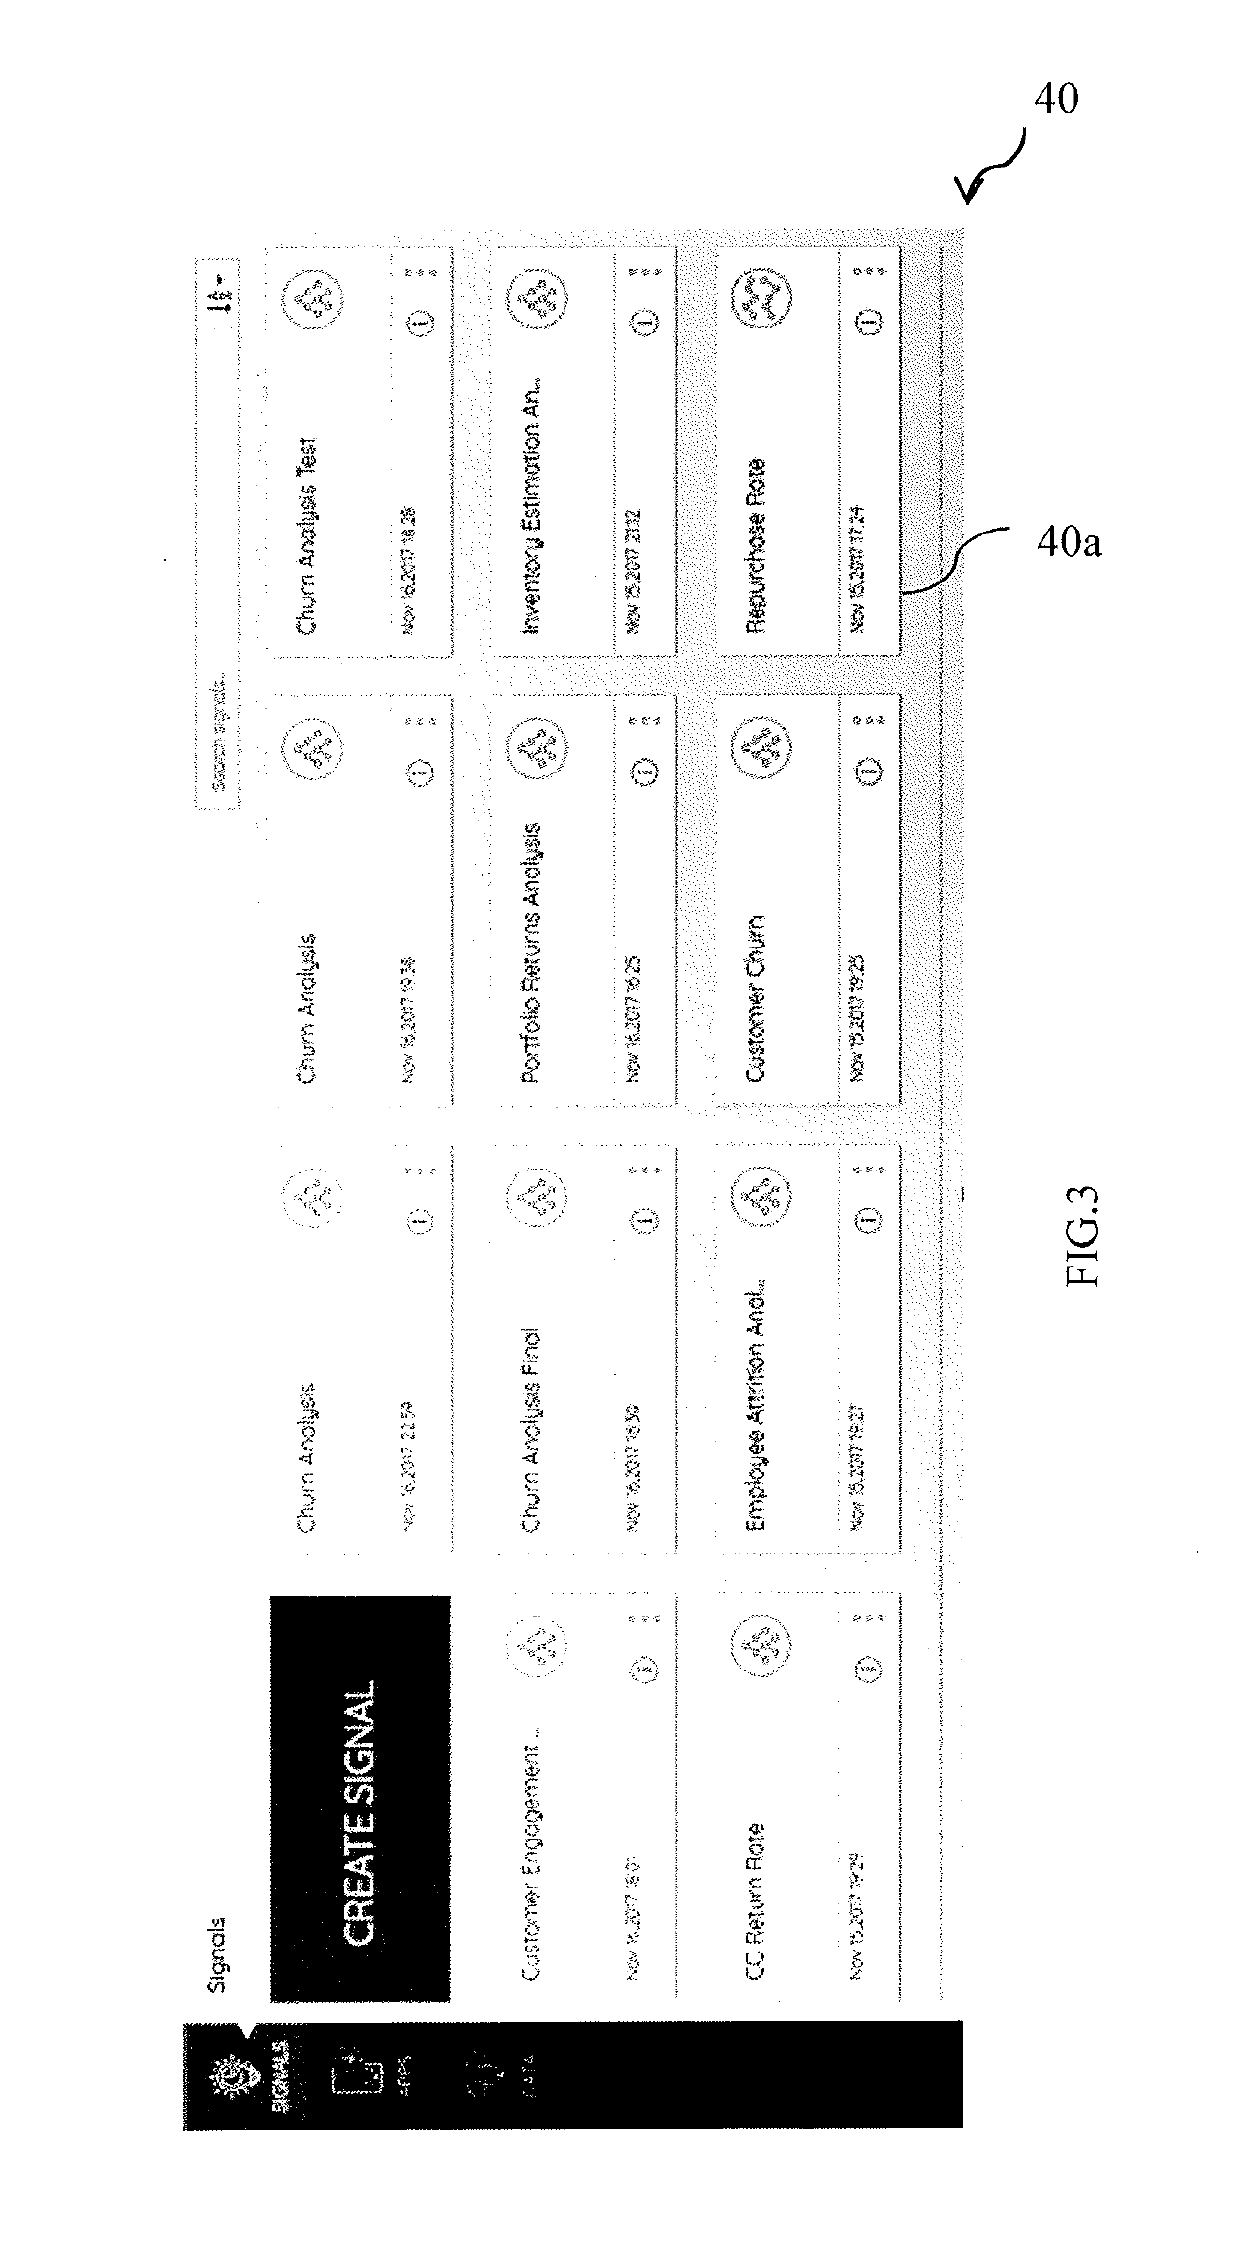 System and method for data analysis and presentation of data